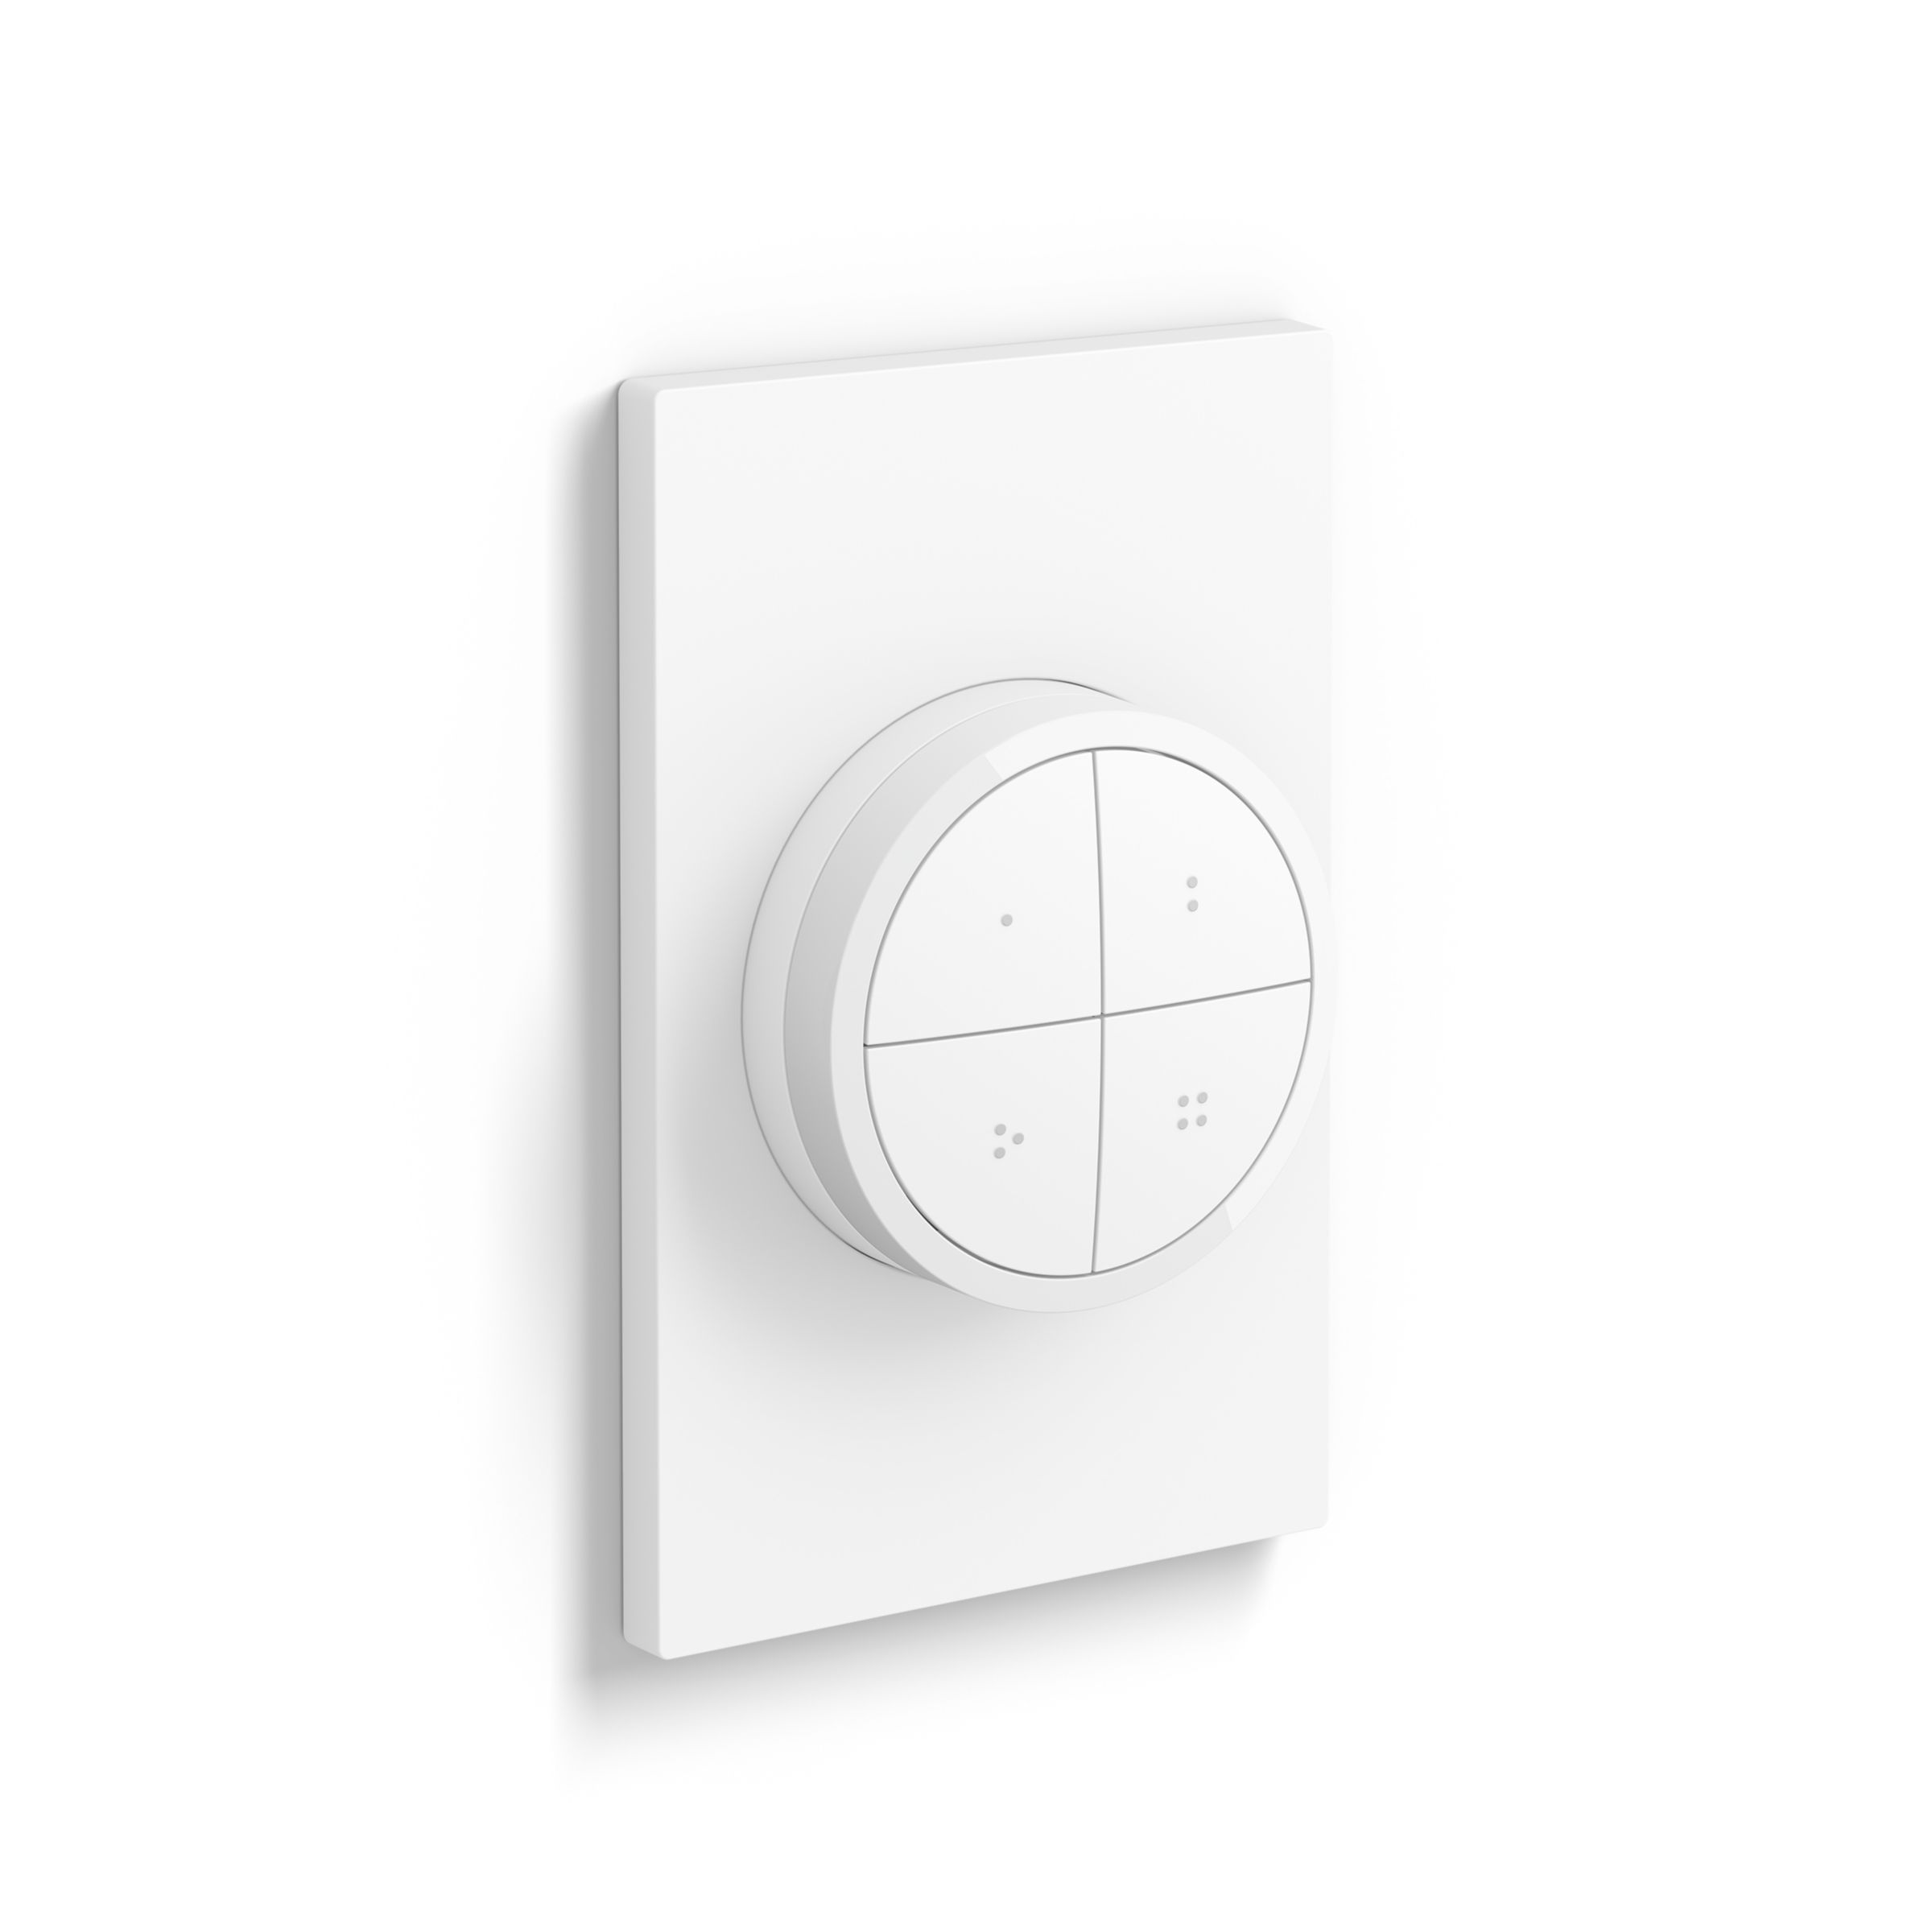 Philips Hue Wall Tap Dial Light Switch, Portable, White - 1 Pack